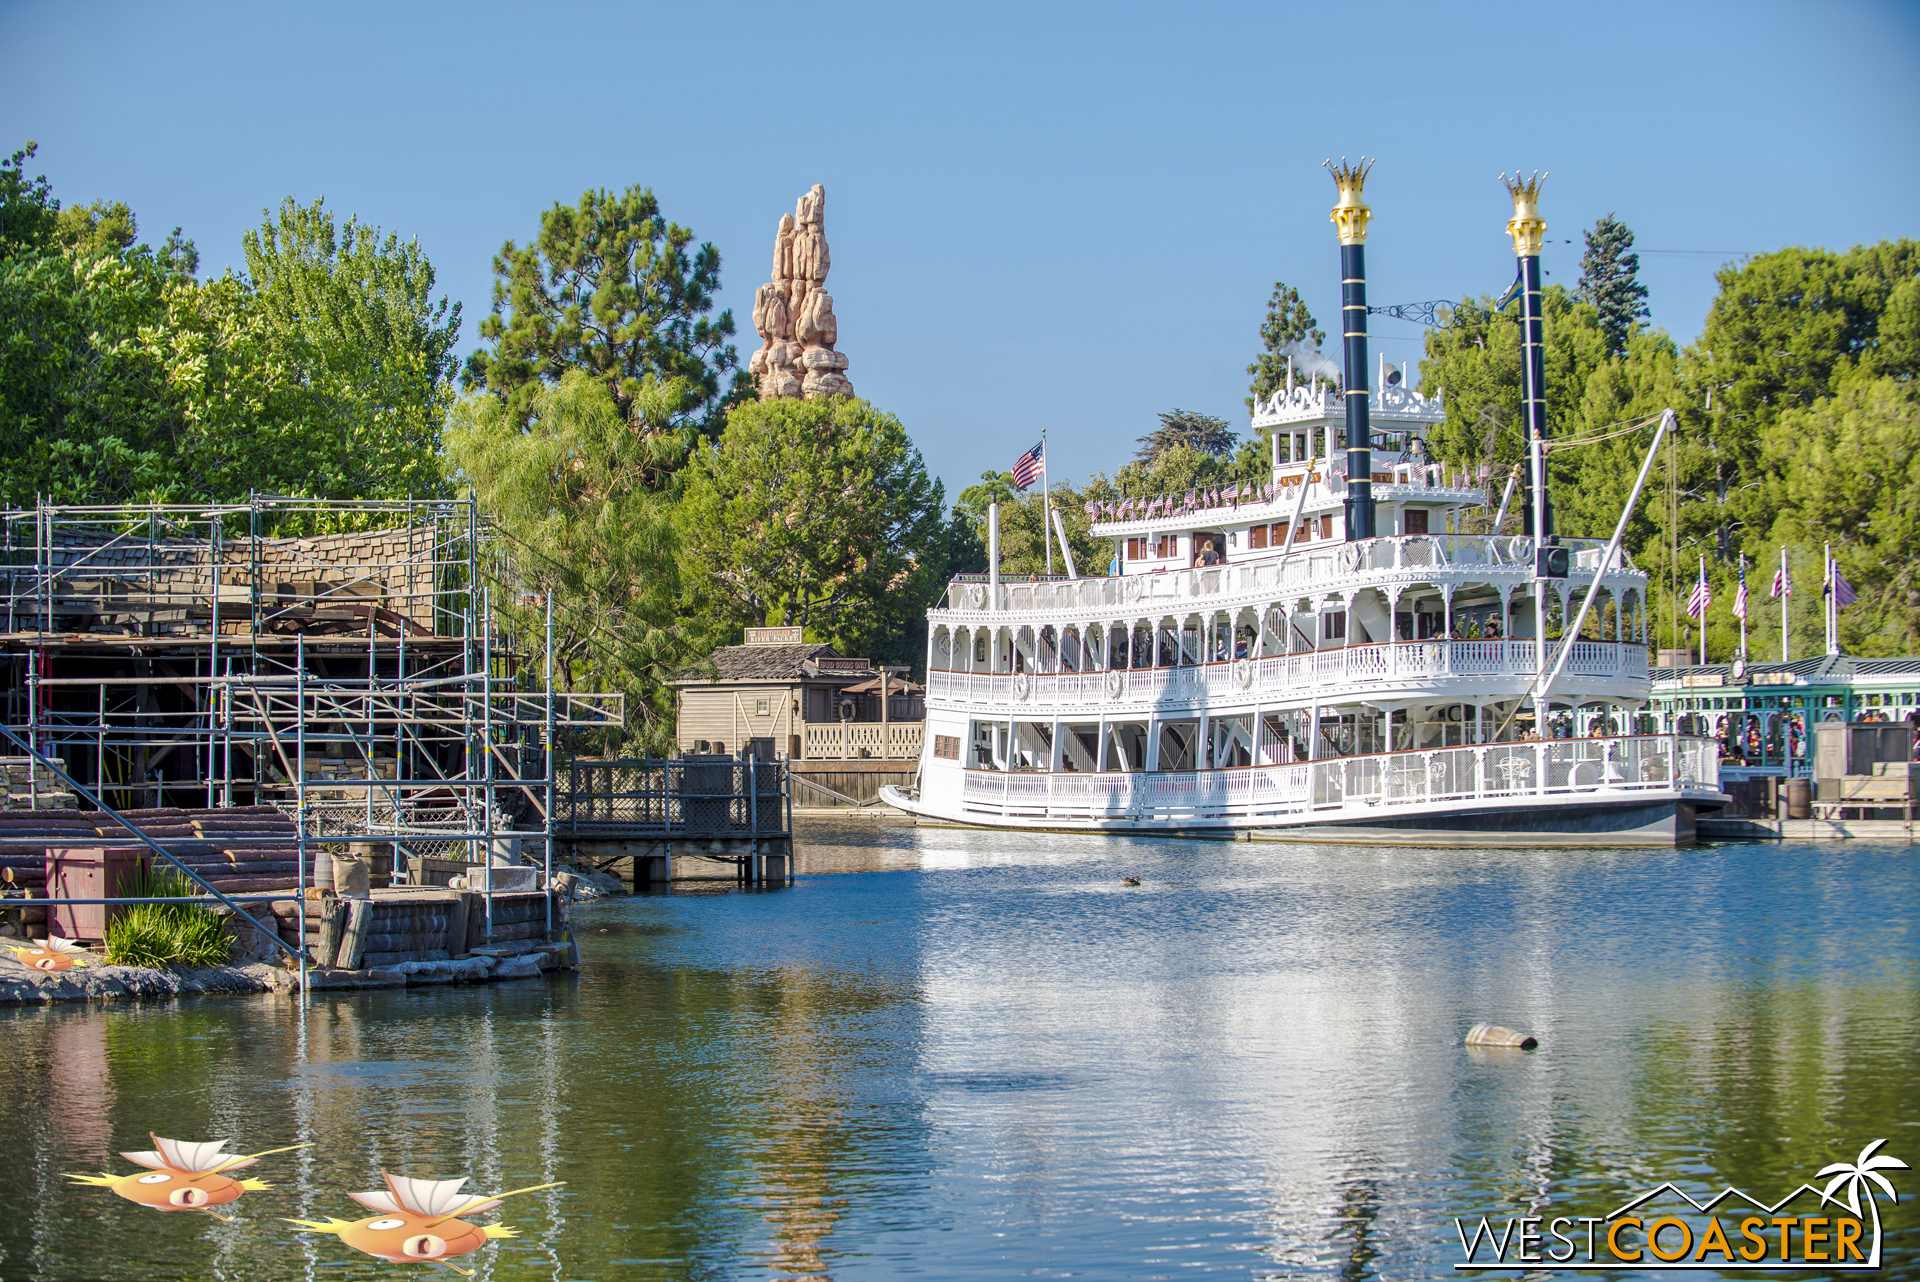  Looking the opposite way from New Orleans Square. 